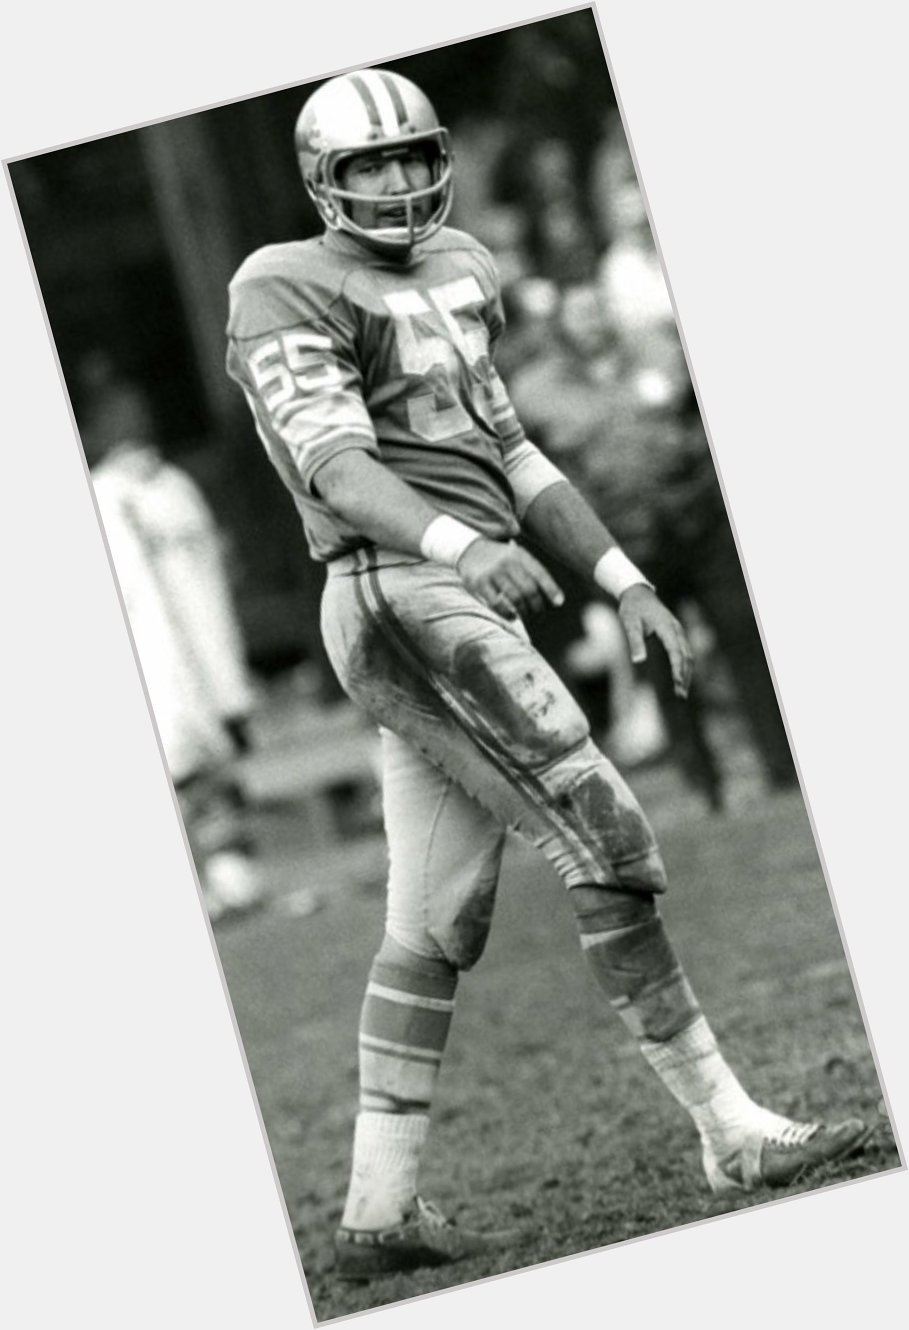 Happy BDay Wayne Walker!(on 9/30) LB-K \58-72 3 Pro Bowls, 1x All-Pro Least accurate K in history 